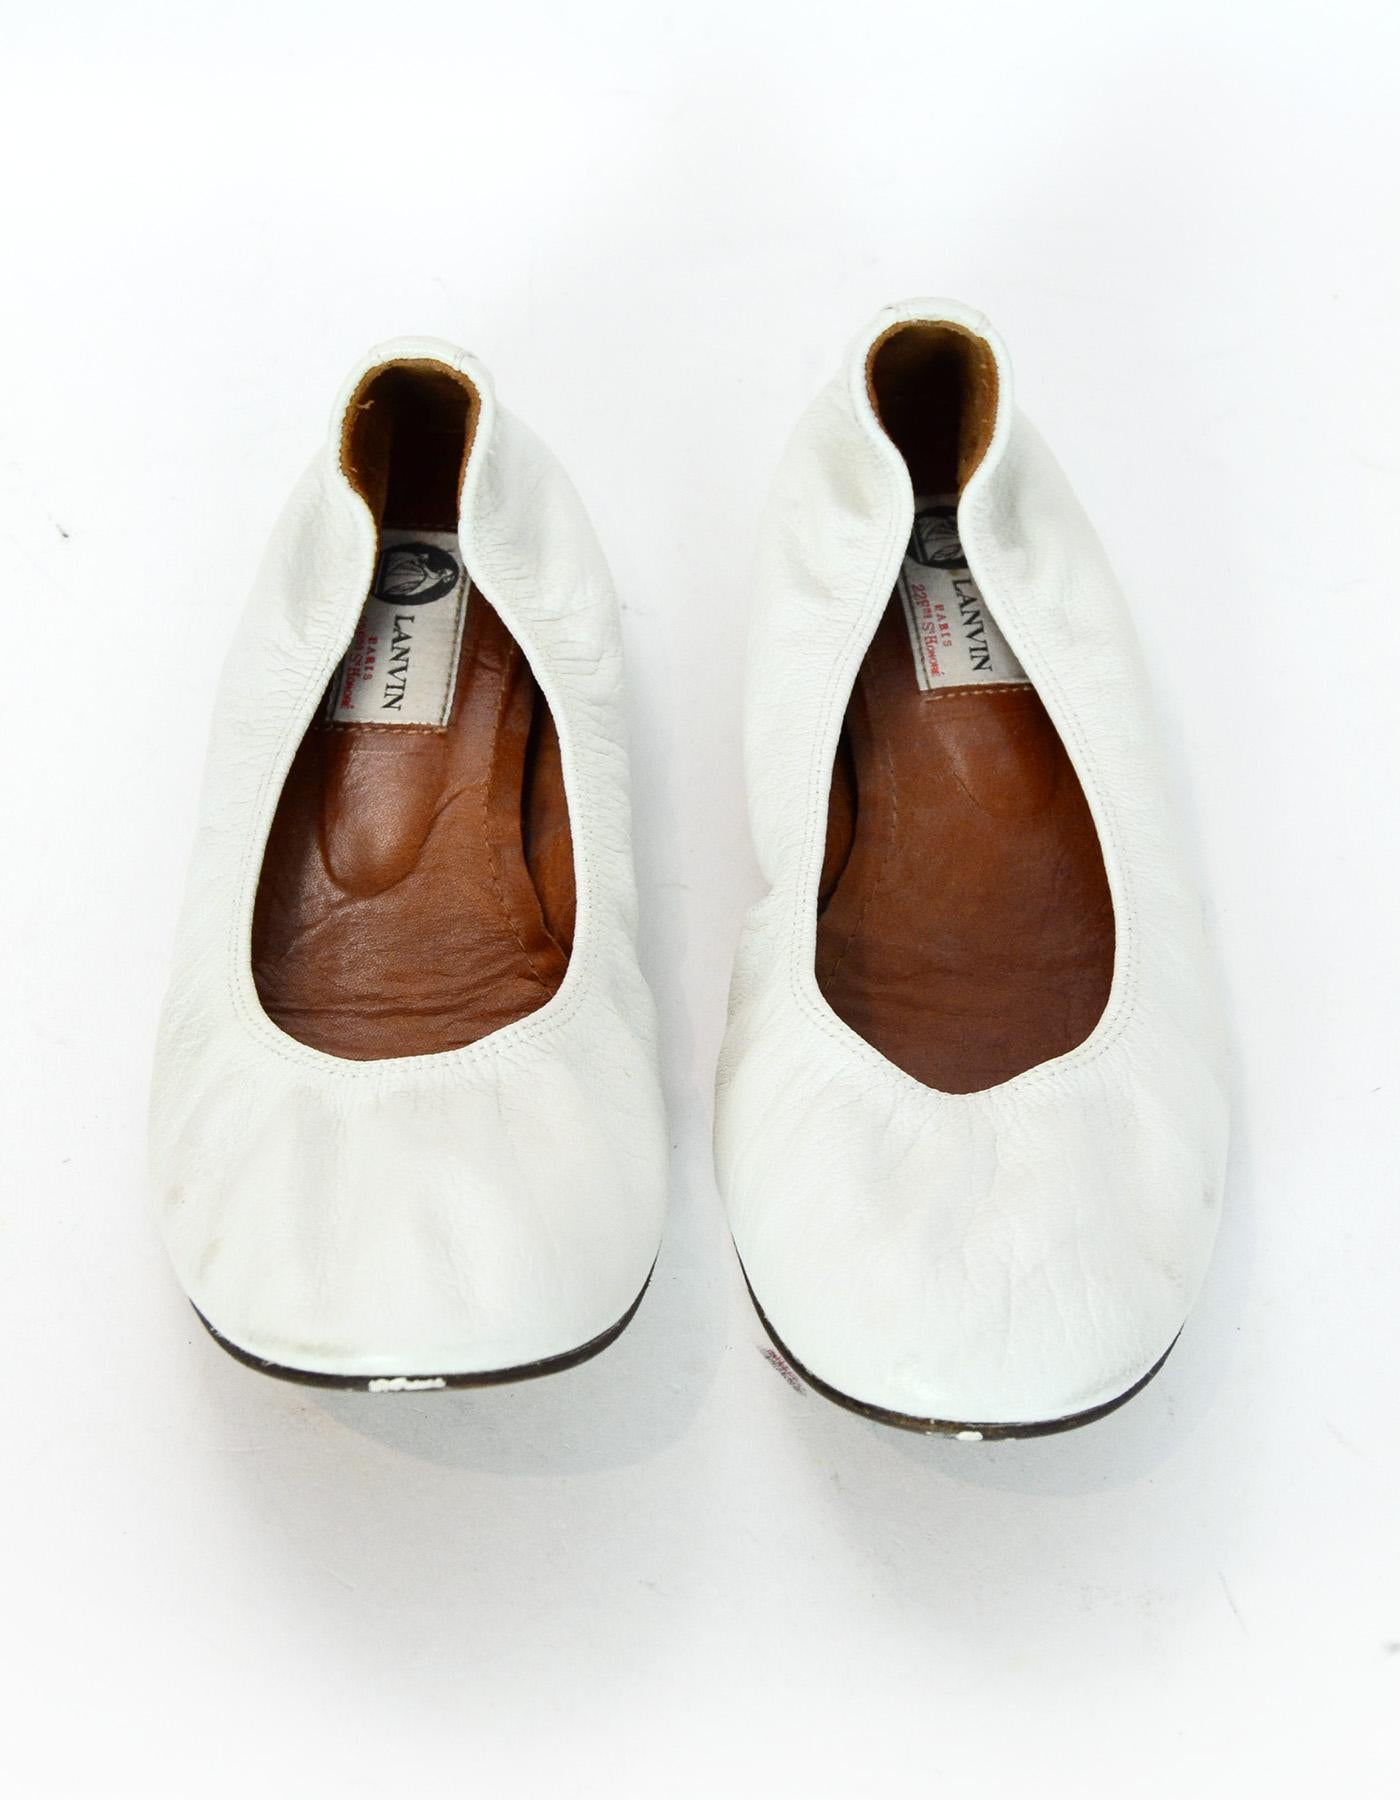 Lanvin White Leather Elastic Flats Sz 40.5

Color: White
Materials: Leather
Closure/Opening: Slide on 
Overall Condition: Excellent pre-owned condition with exception of some wear at soles, front toe and on the back of the heels. Minor marks in the